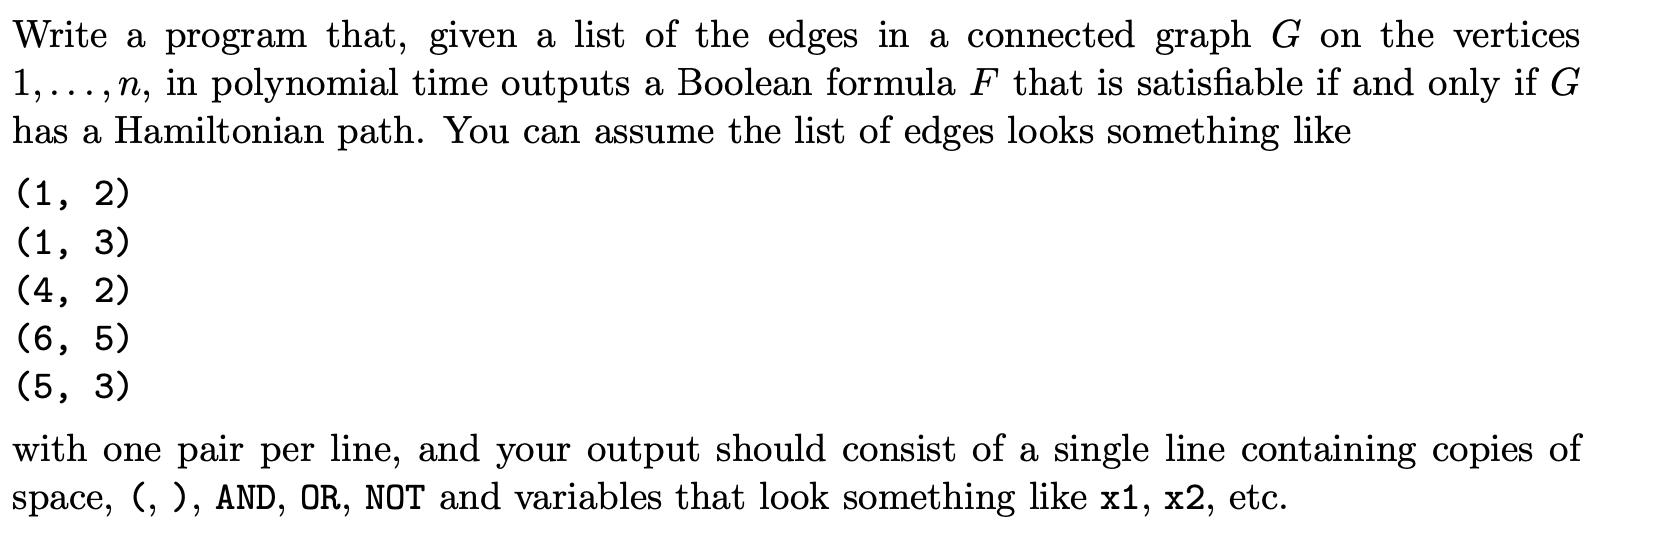 Write a program that, given a list of the edges in a connected graph G on the vertices 1,...,n, in polynomial